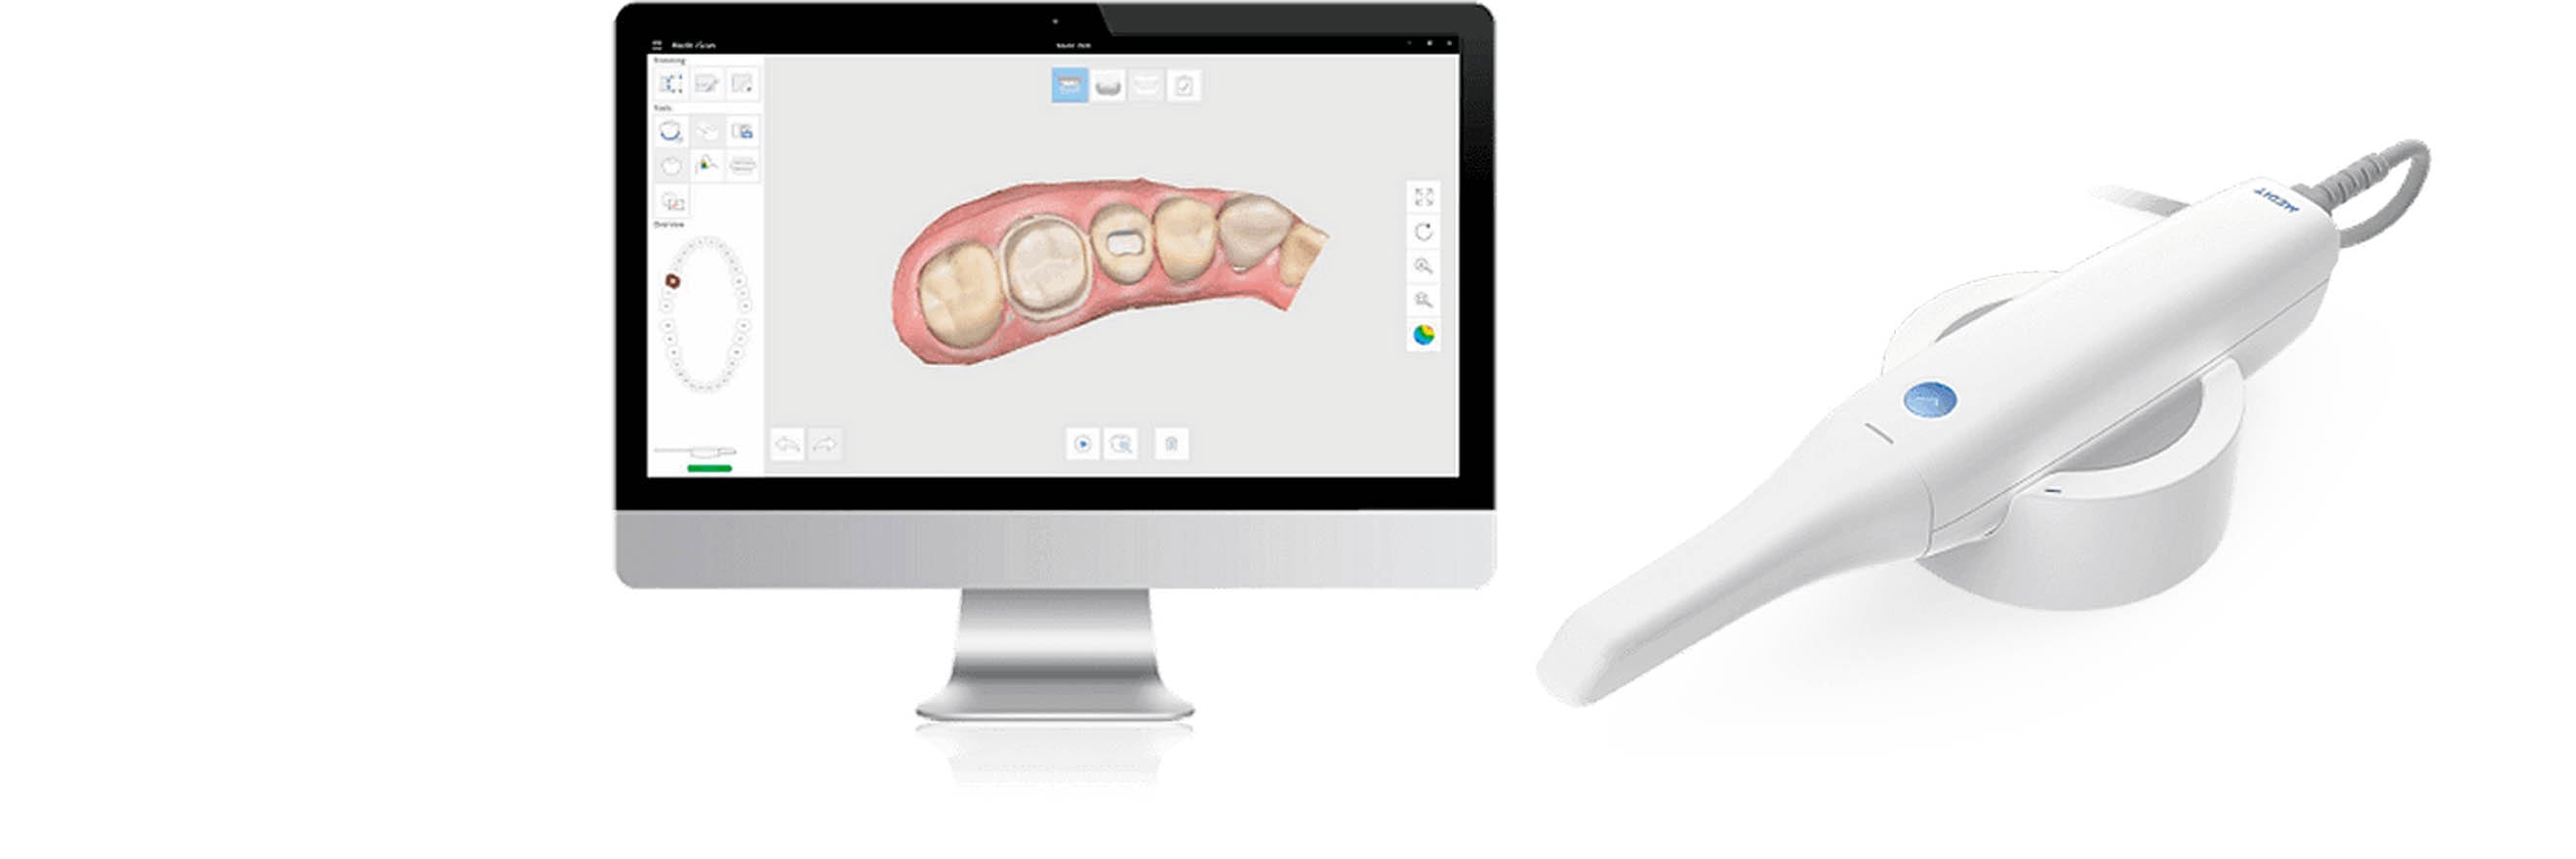 Digital Dental Tools and Technology